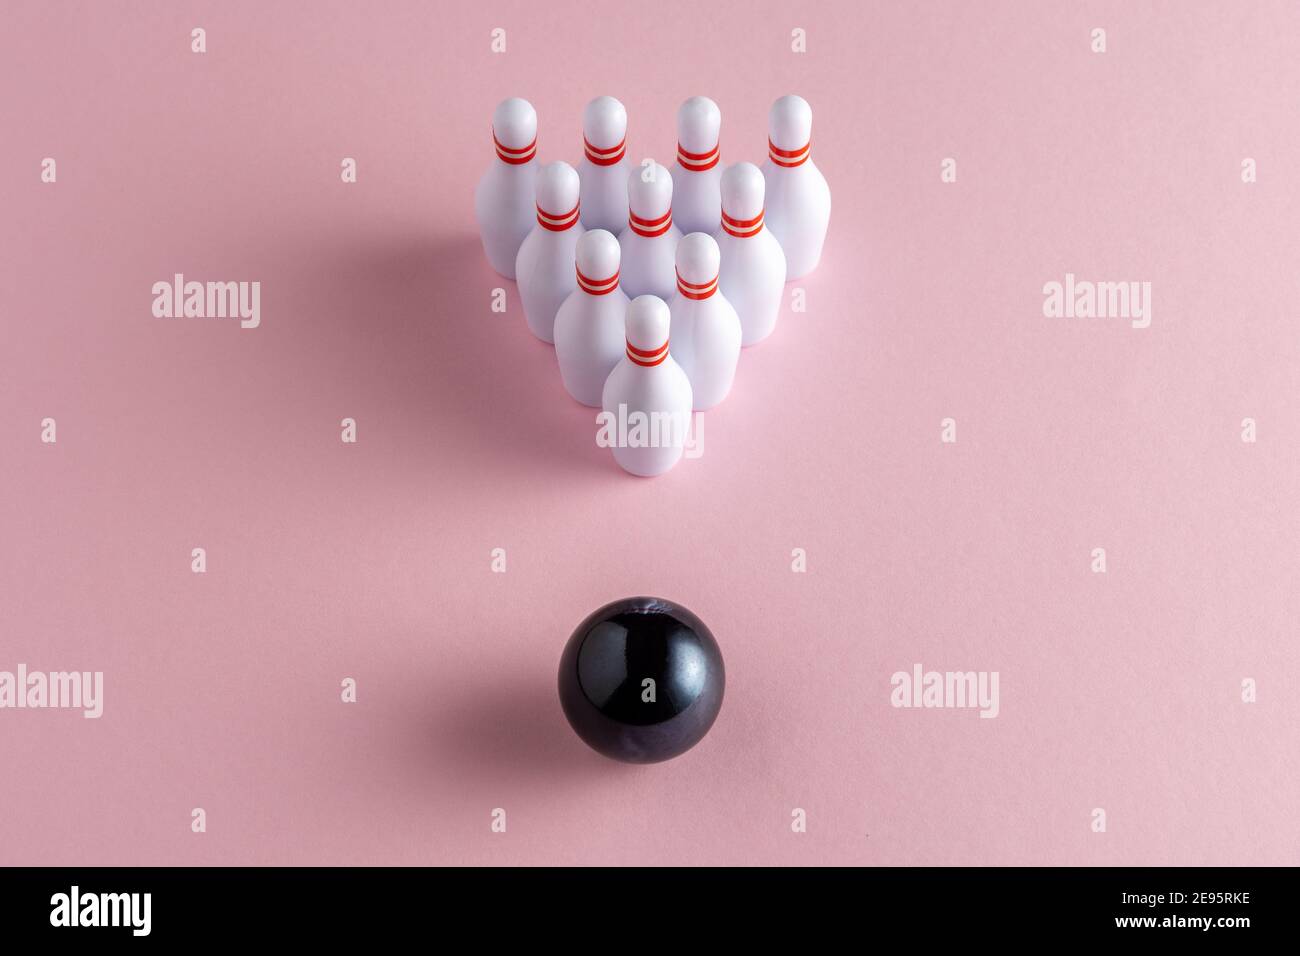 Bowling ball and white skittles on pastel pink background. Minimal creative concept. Stock Photo